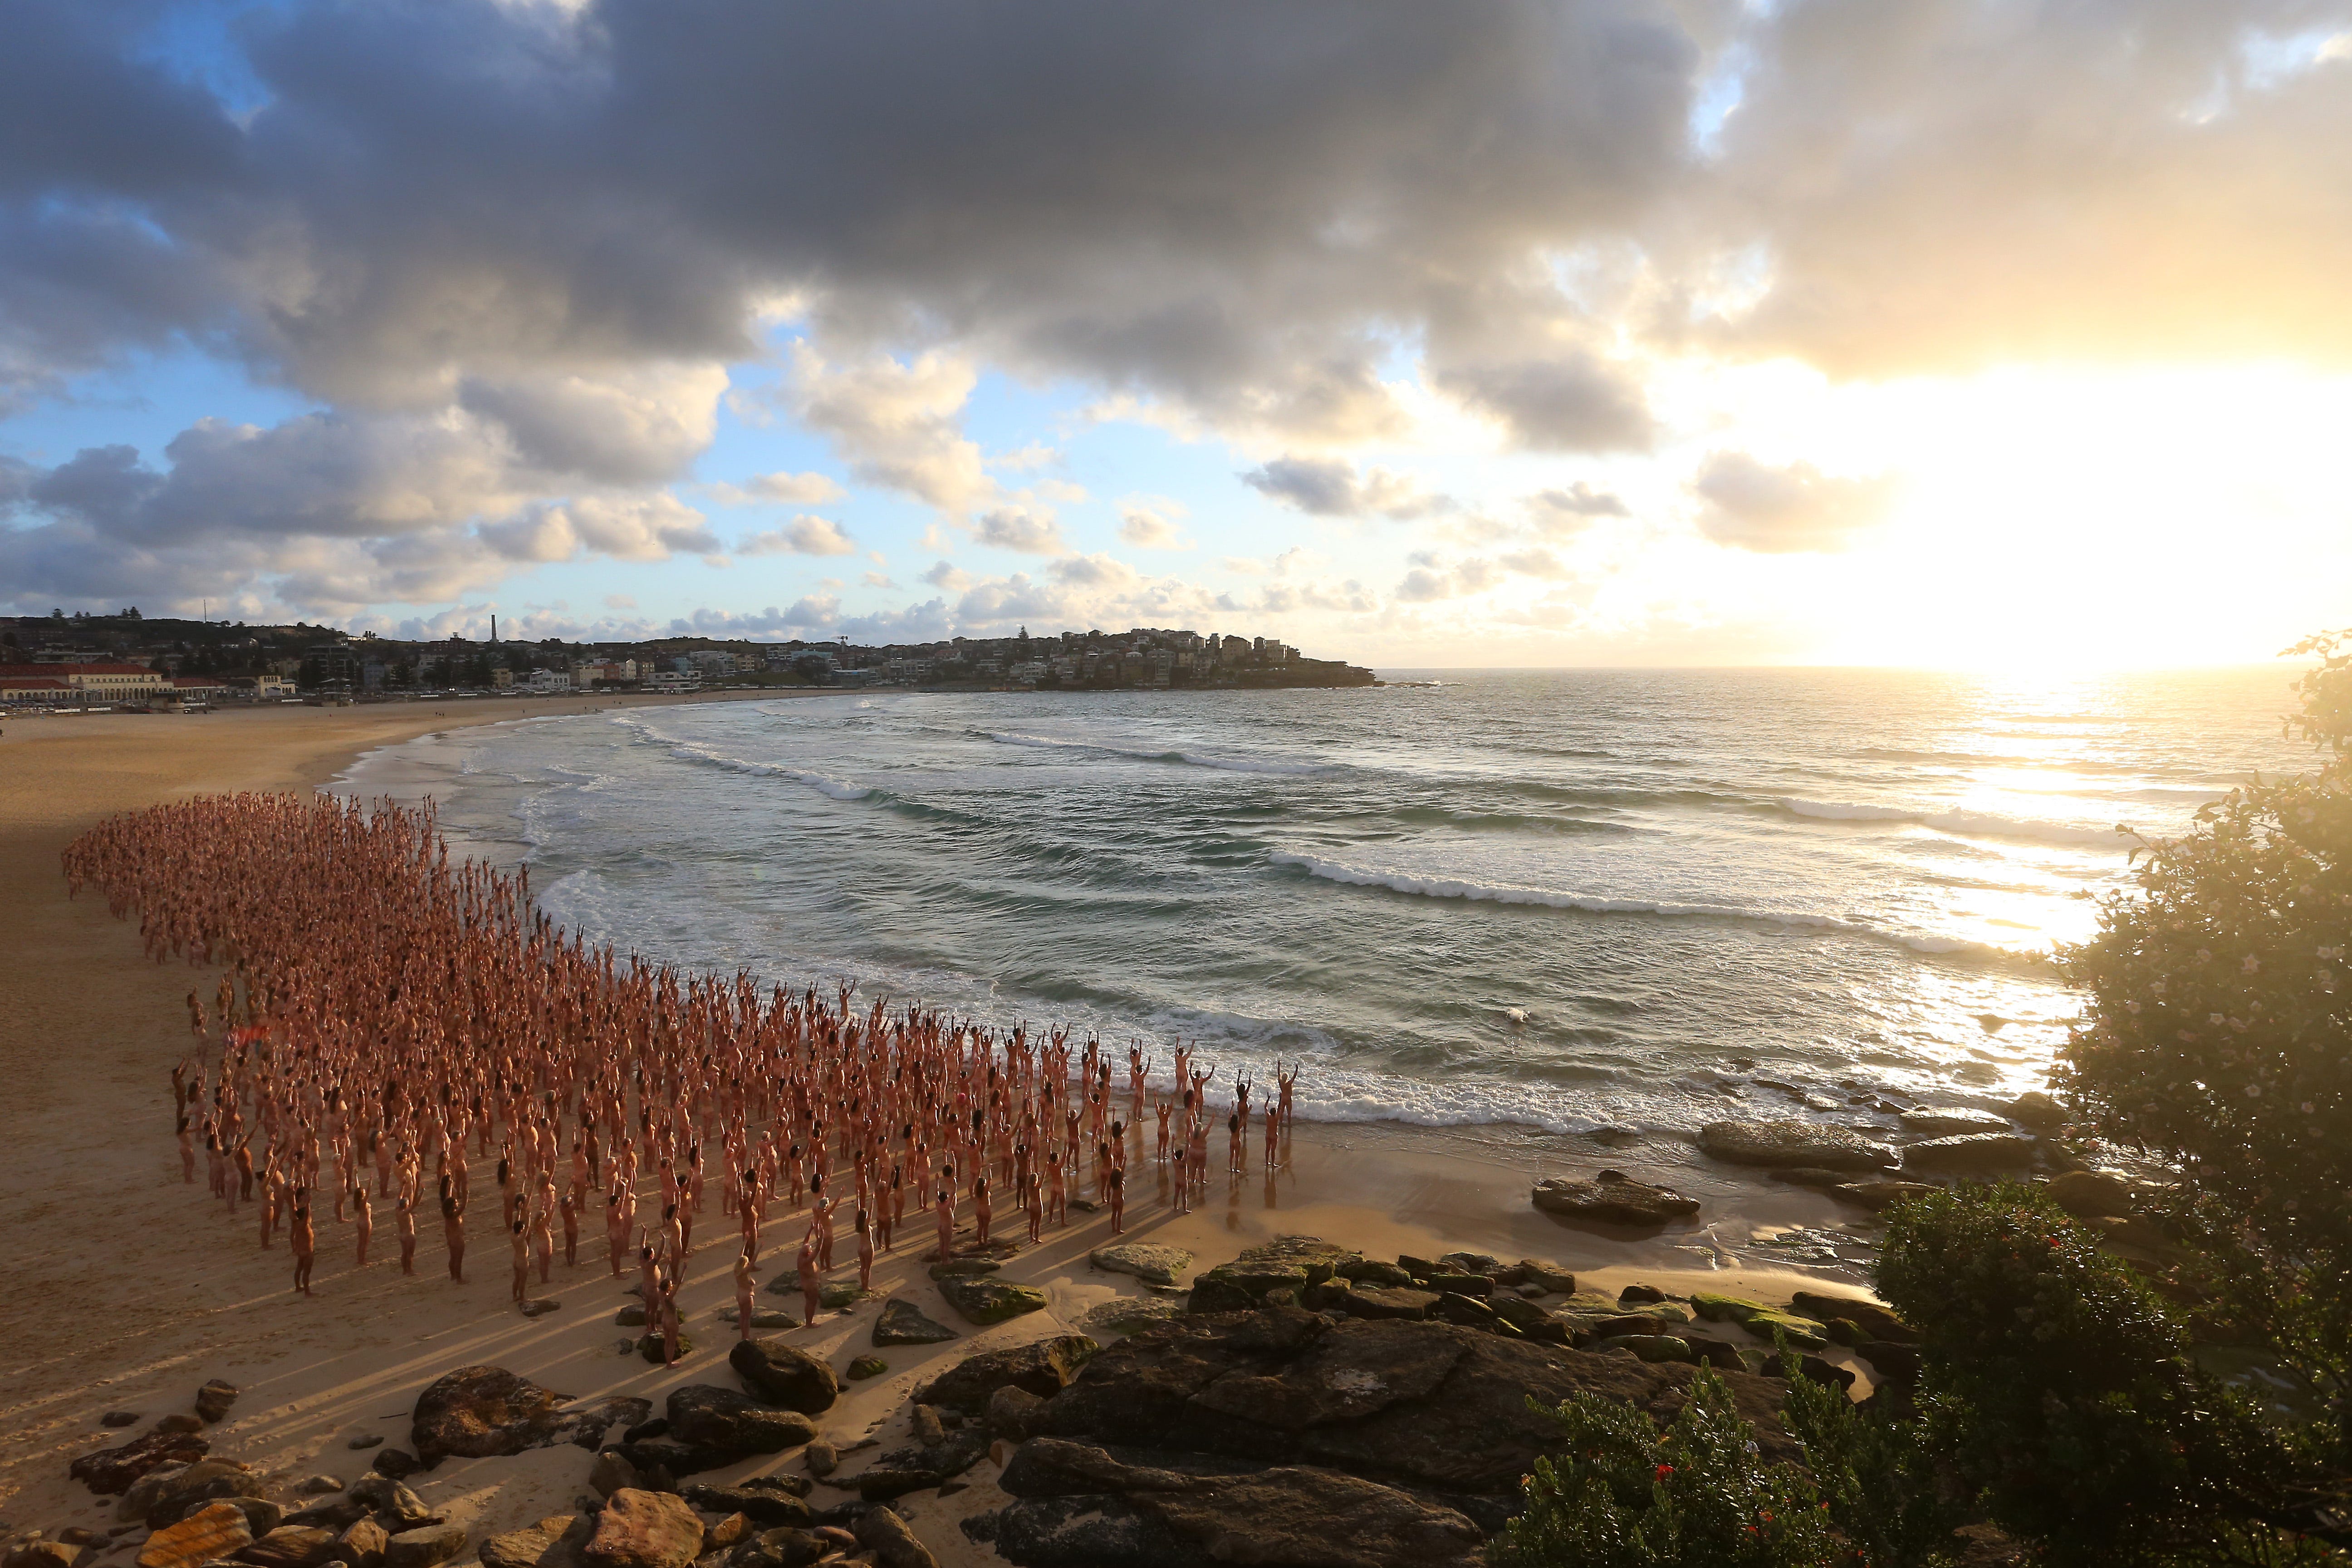 Thousands pose nude at Australian beach in Spencer Tunick photo shoot pic